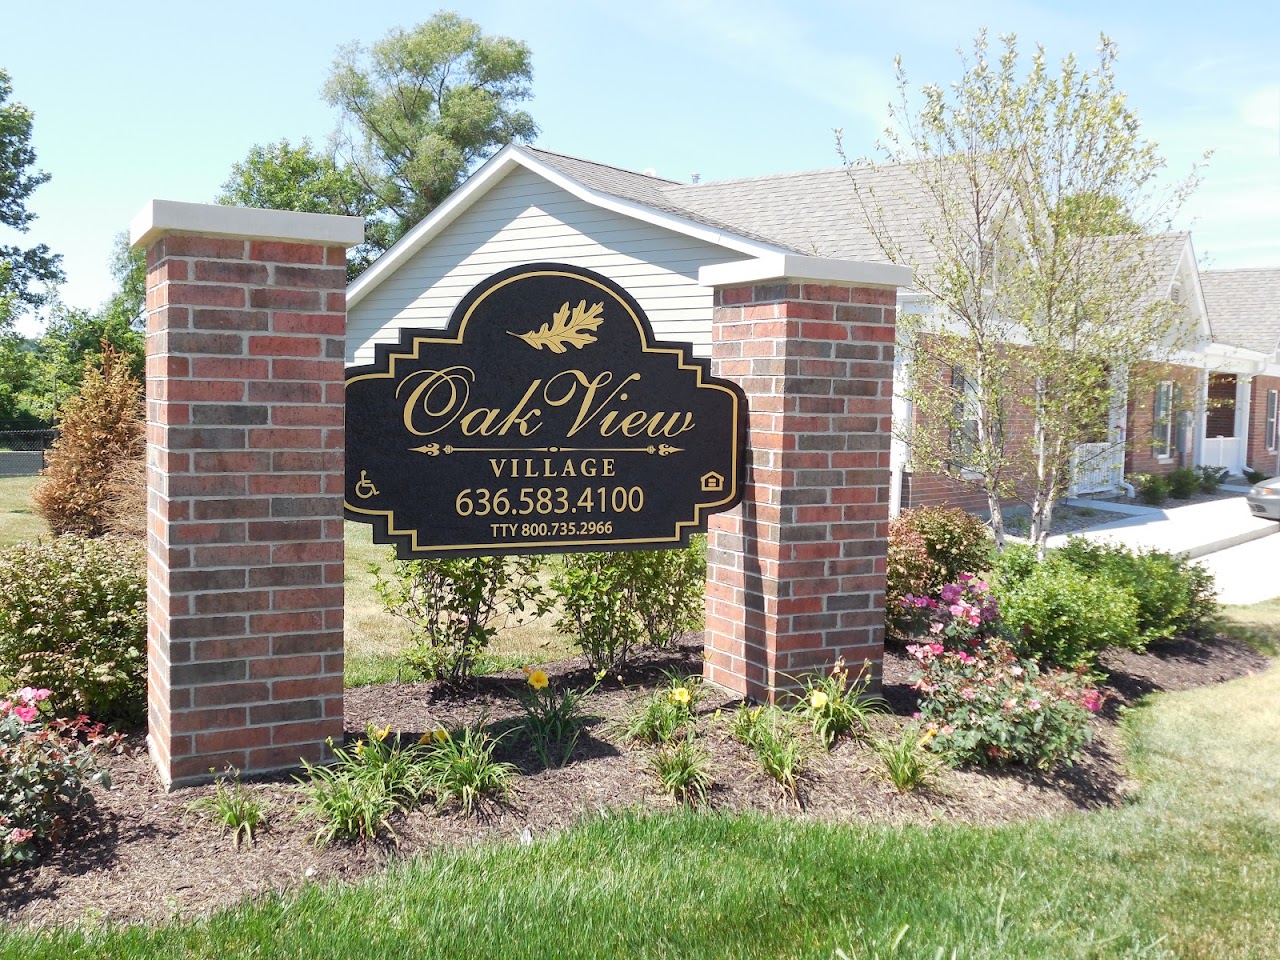 Photo of OAK VIEW VILLAGE-PHASE 3. Affordable housing located at 204 OAK VIEW CIRCLE UNION, MO 63084